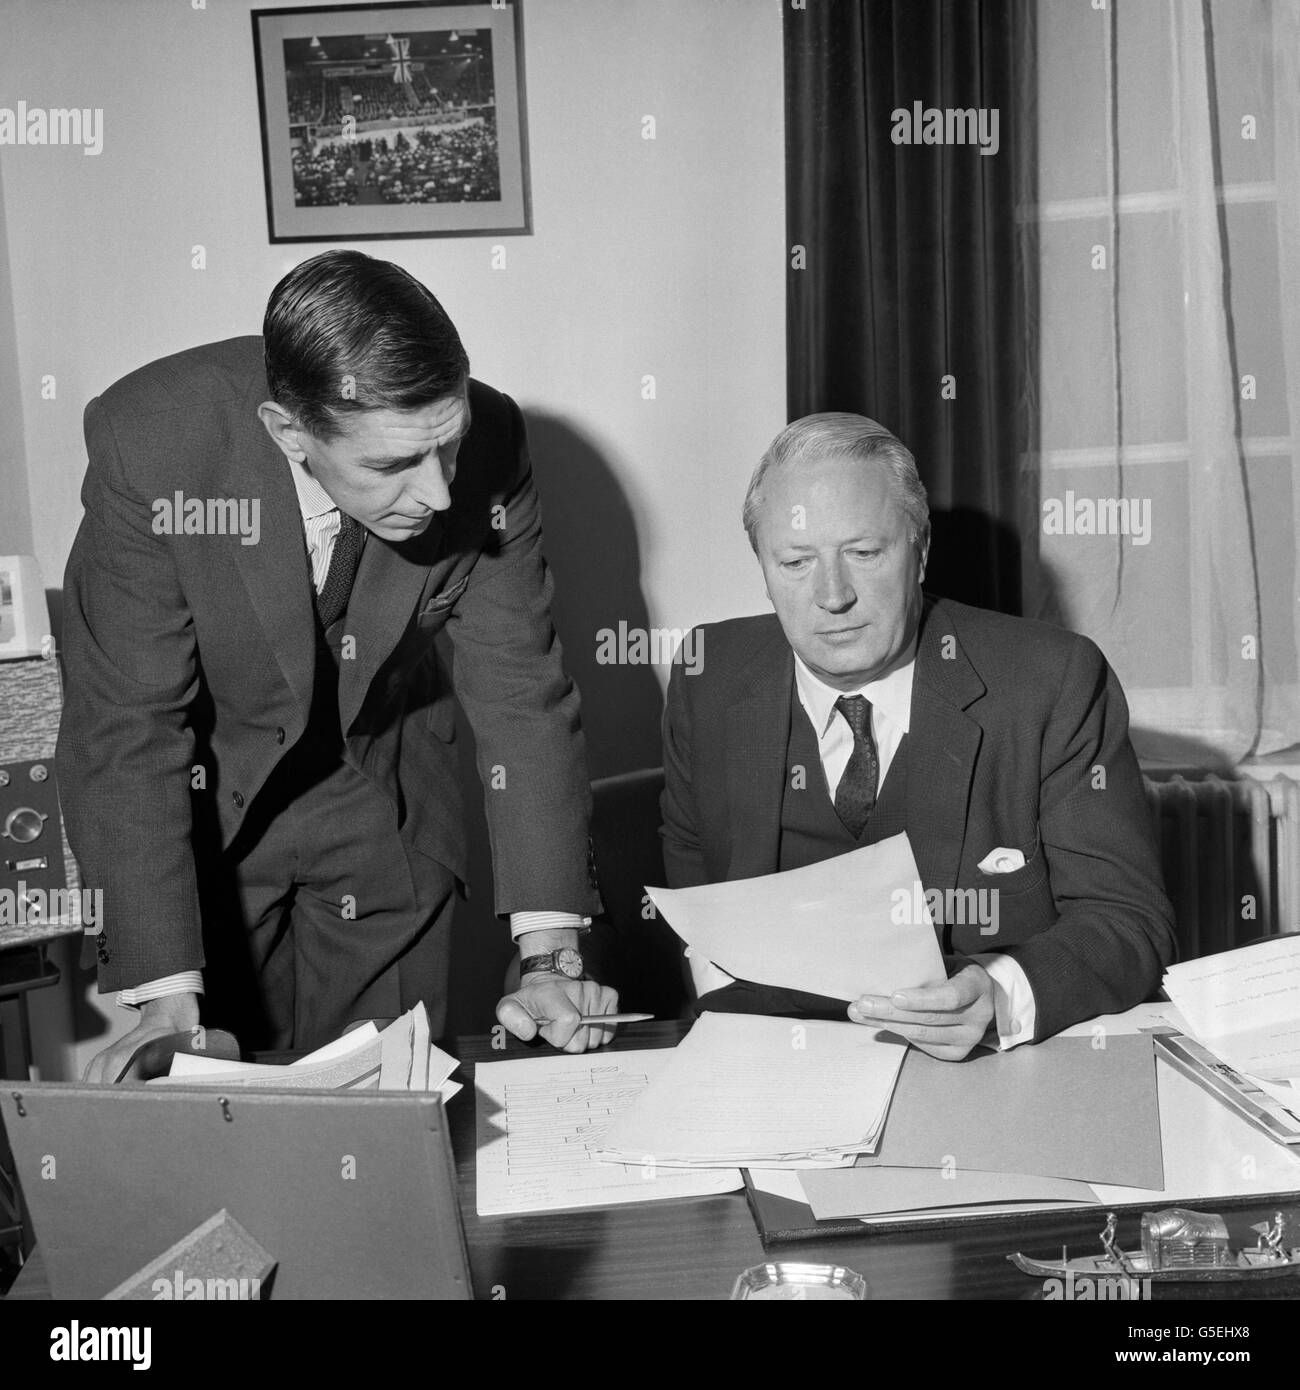 Leader of the opposition, (Conservative), Edward Heath (r) and Tory Party Chairman Edward Du Cann (l) checking over papers together at the Conservative Party Central Office, Smith Square, London, after he had been announced that there would be a General Election on March 31st of that year. Stock Photo